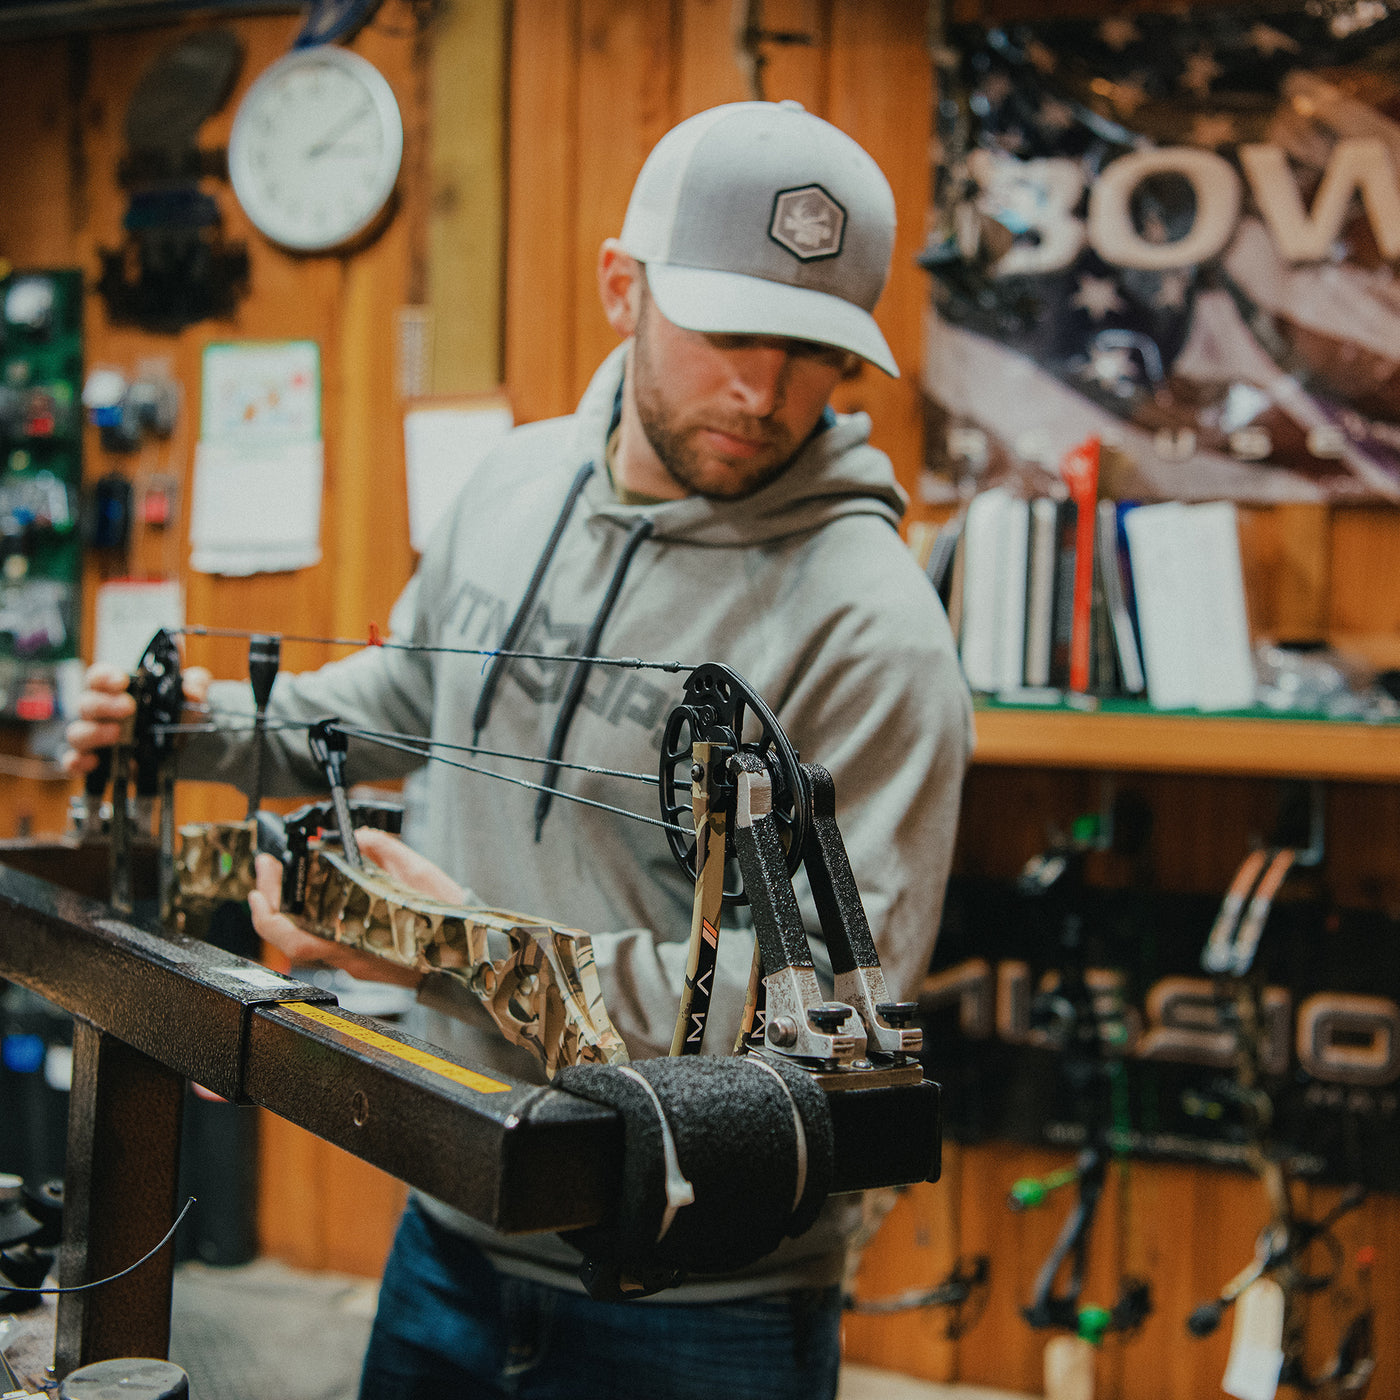 Lucky Shot Archery is a premier archery pro shop located in Chehalis Washington between seattle and portland. Whether you have been shooting bows for years or are new to the archery world we will help you meet whatever goals you have. 